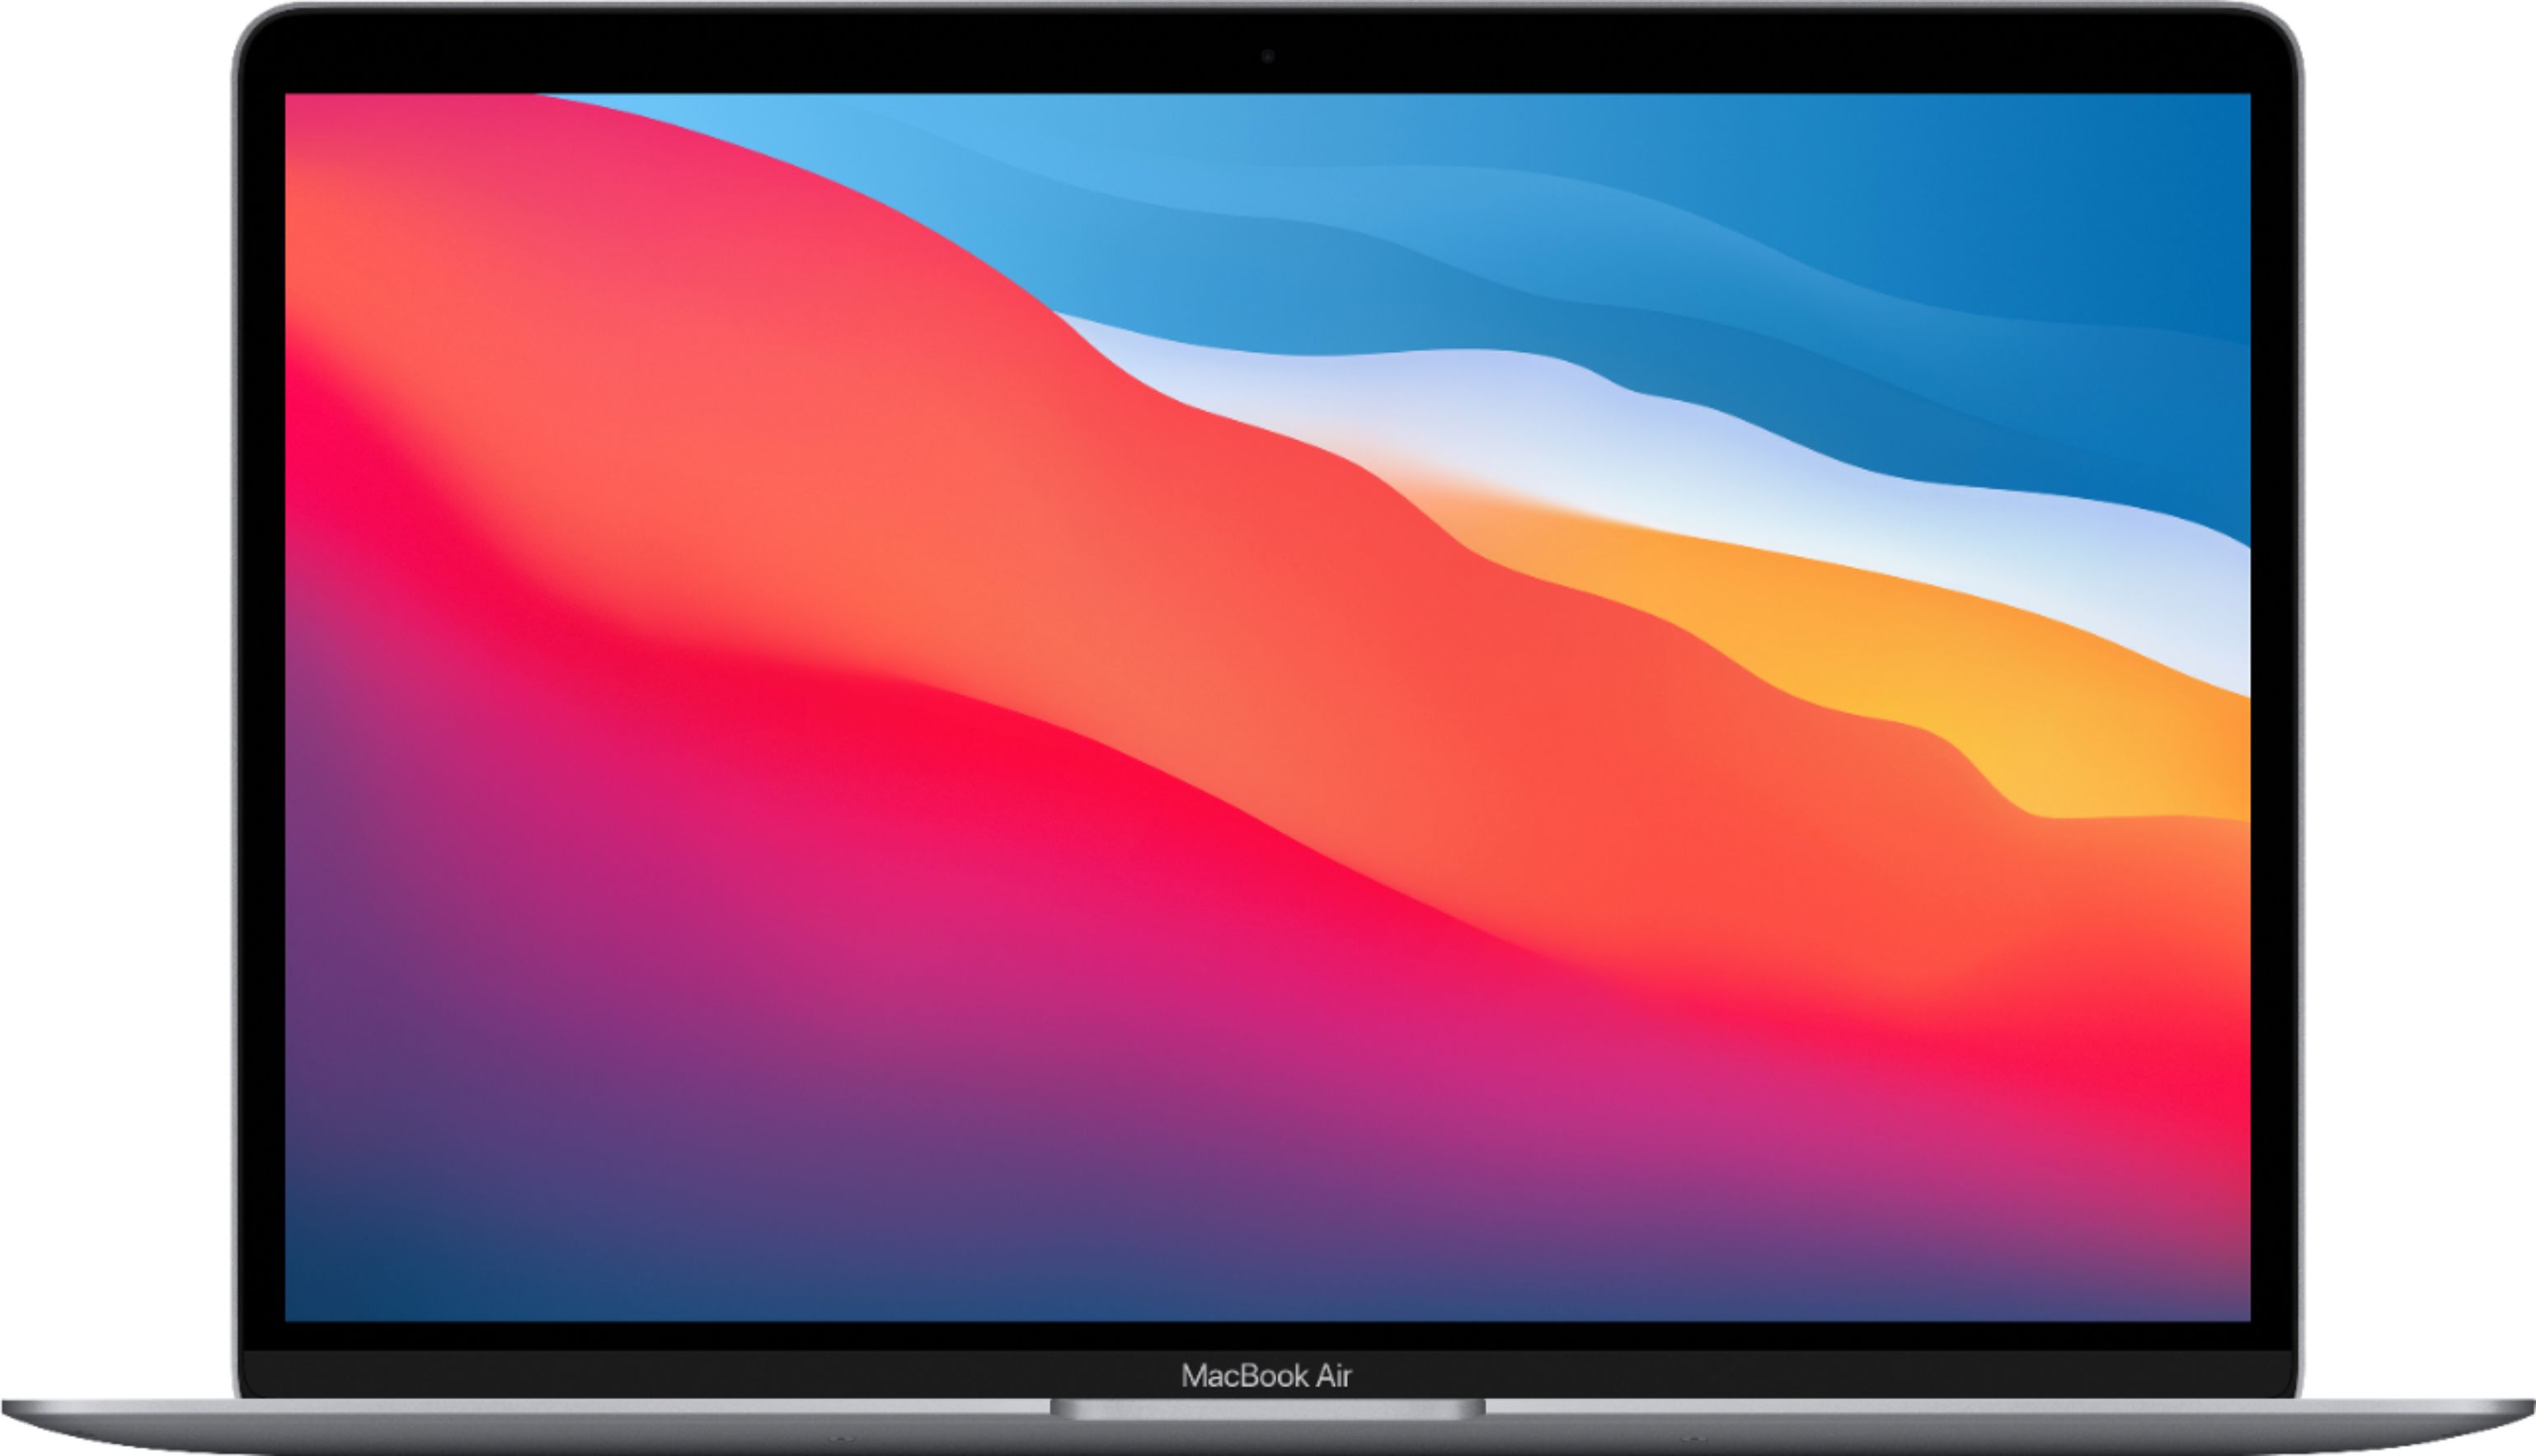 MacBook Air 13.3" Laptop - Apple M1 chip - 8GB Memory - 256GB SSD (Latest Model) $849.99 + Free Shipping or pickup